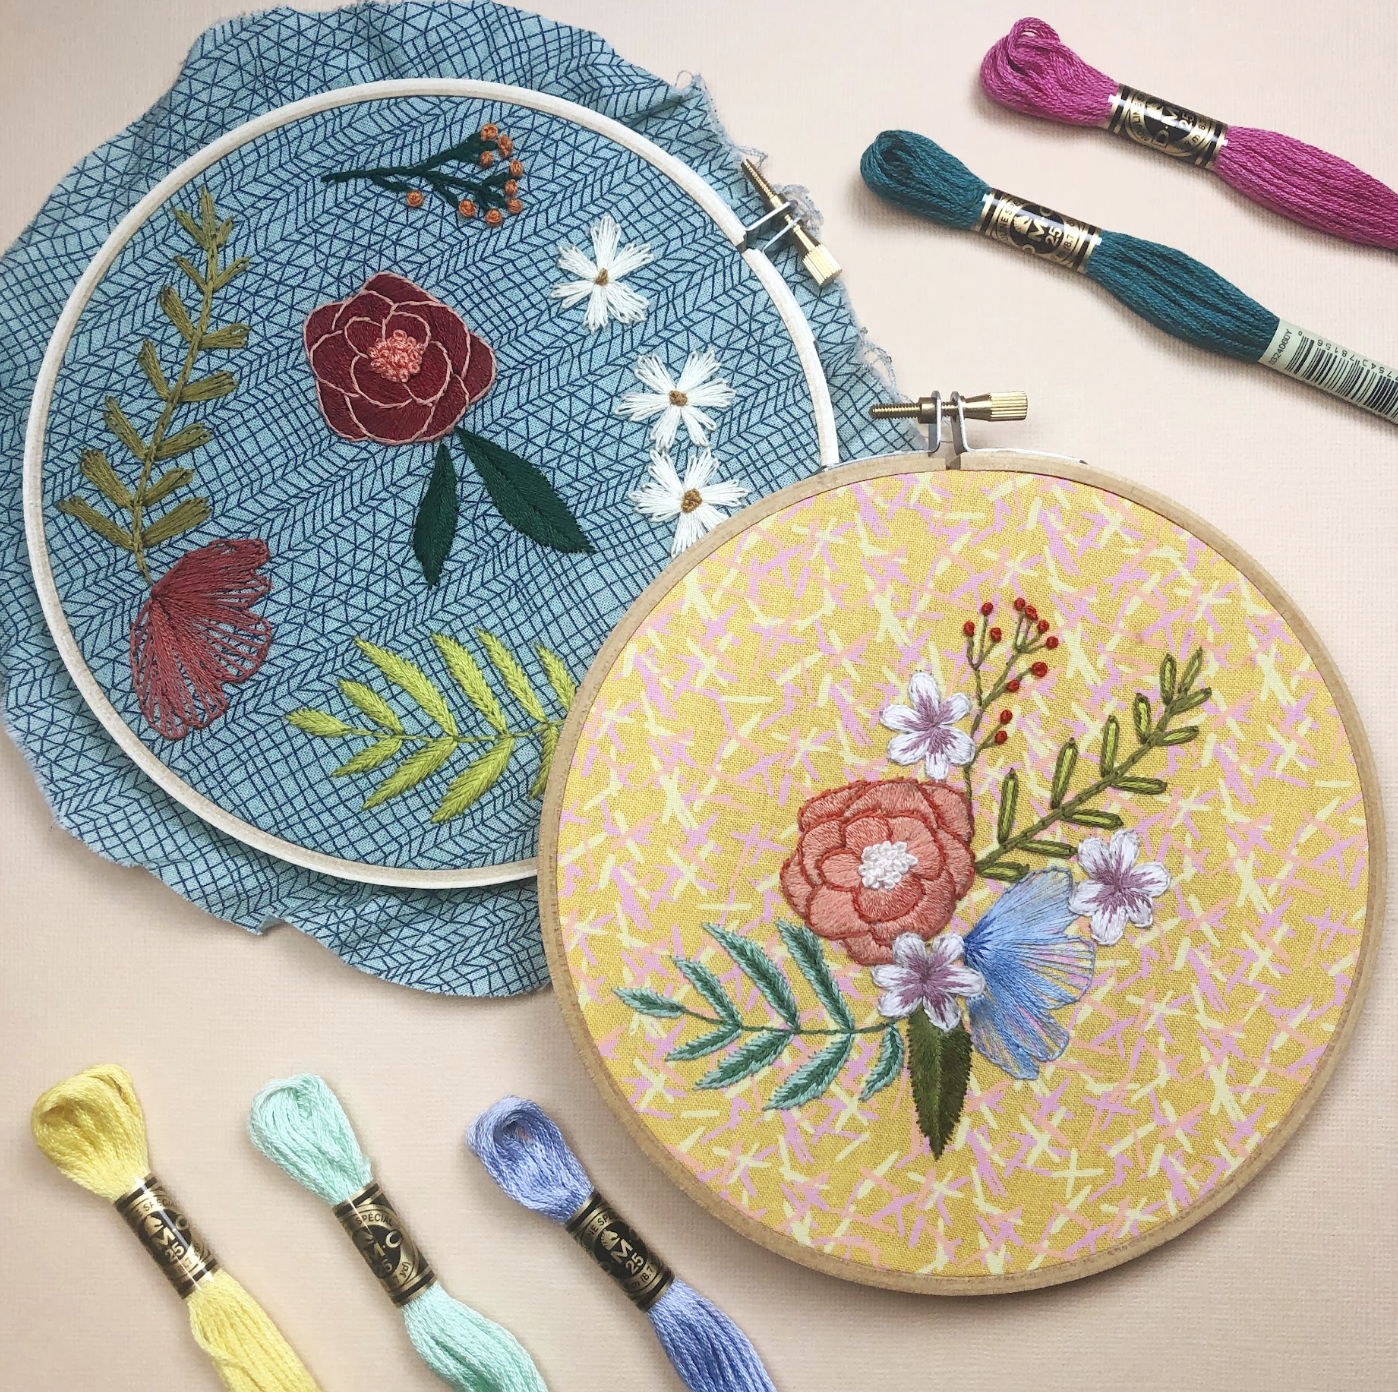 EMBROIDERY CLASS: Floral Embroidery Basics